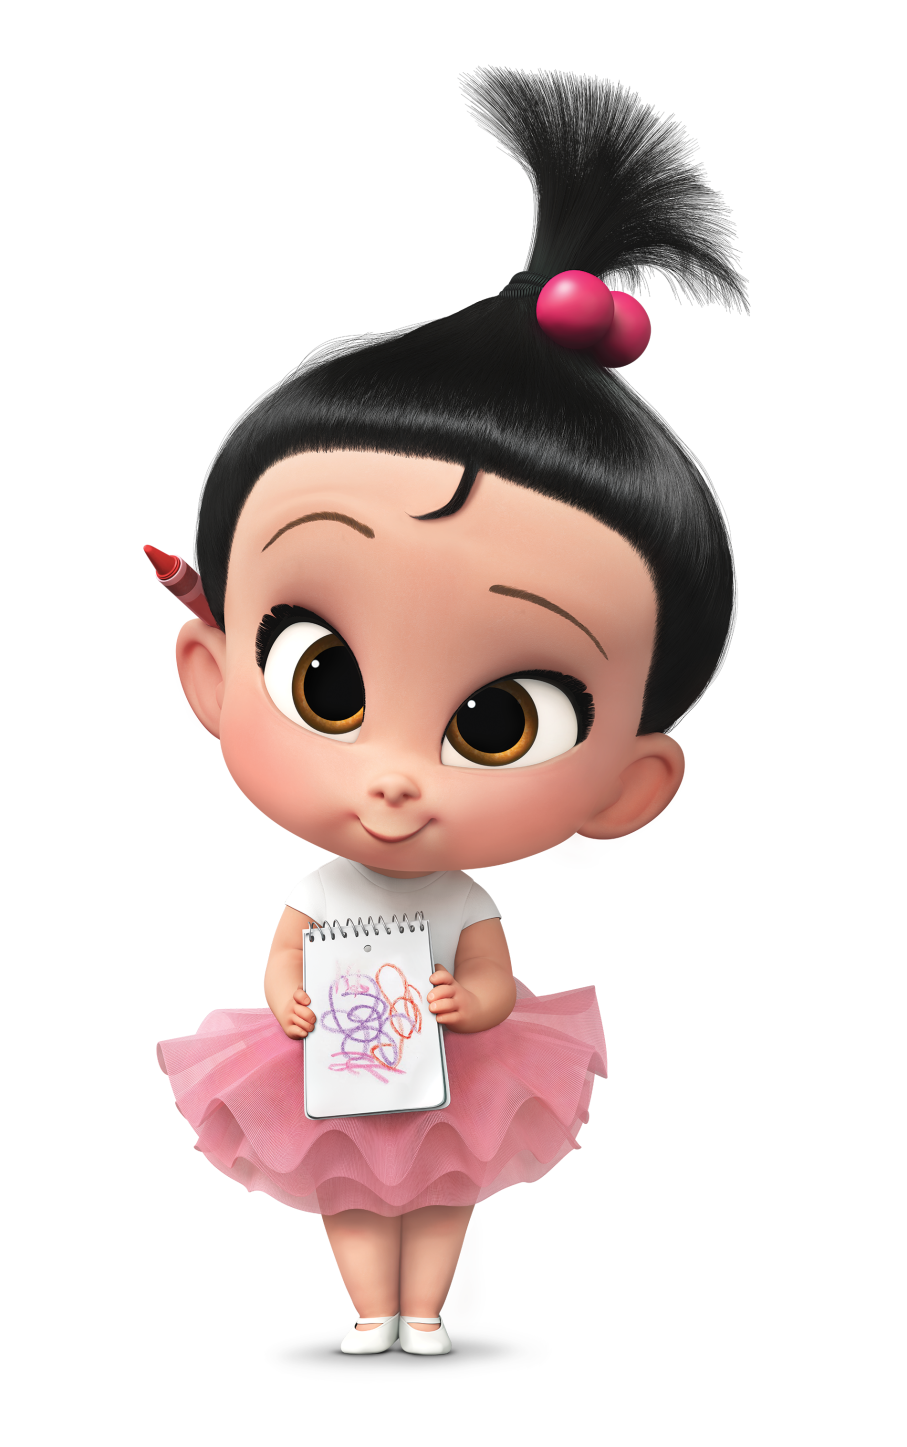 Download Youtube Infant Animated Character Film Free Transparent Image